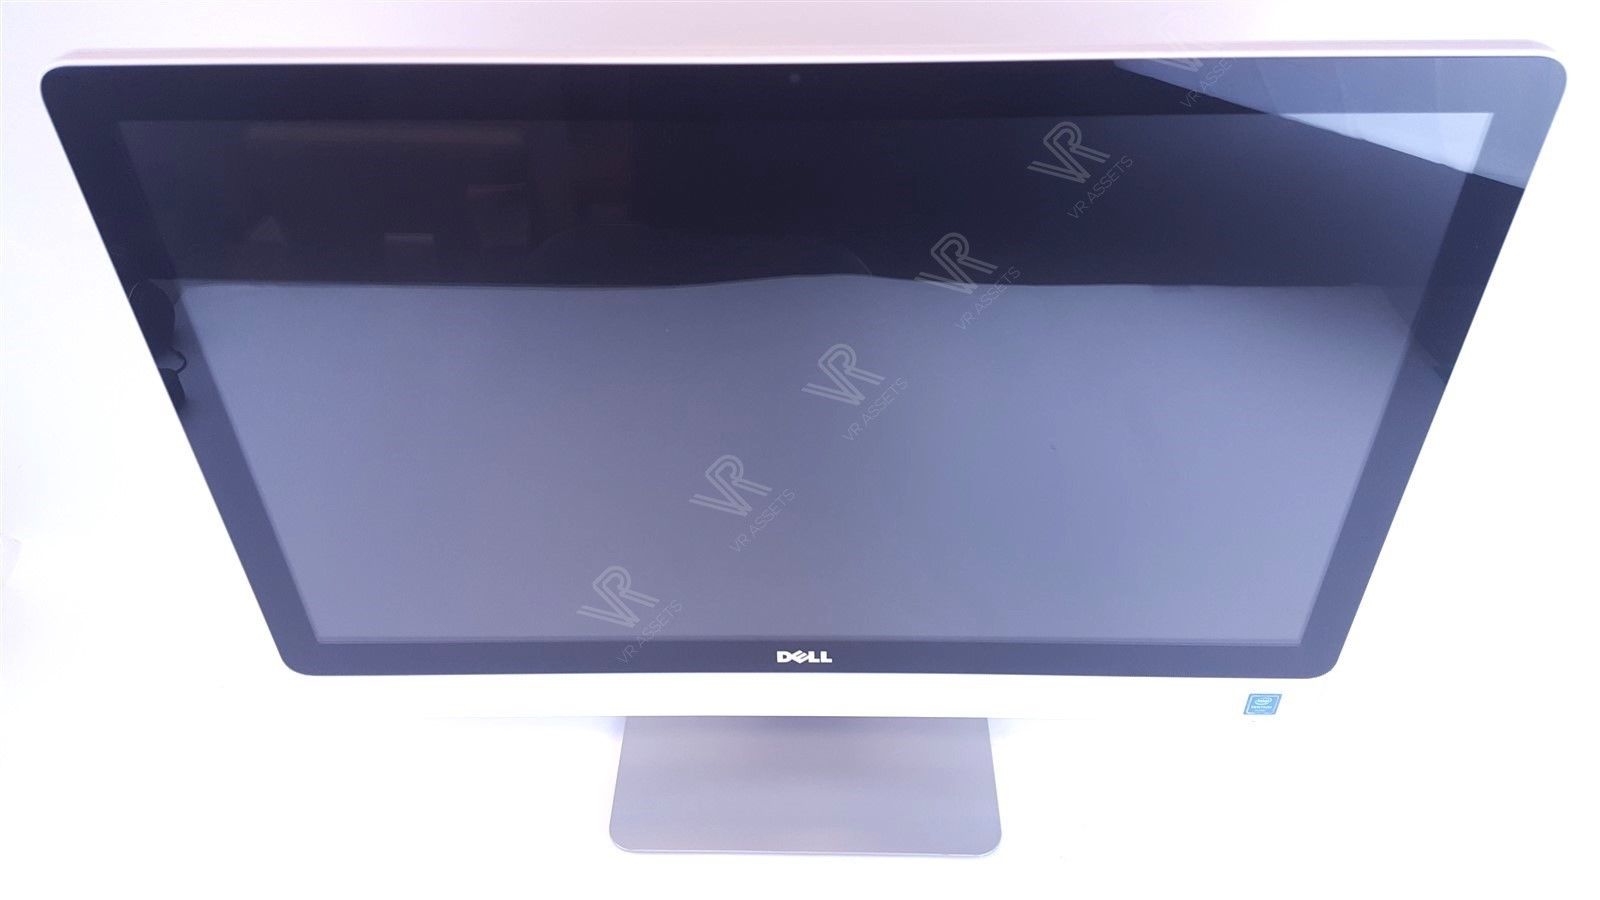 Dell Inspiron 24 3452 24" All-in-One N3700 8Gb 1Tb Touchscreen FHD Windows 10 PC